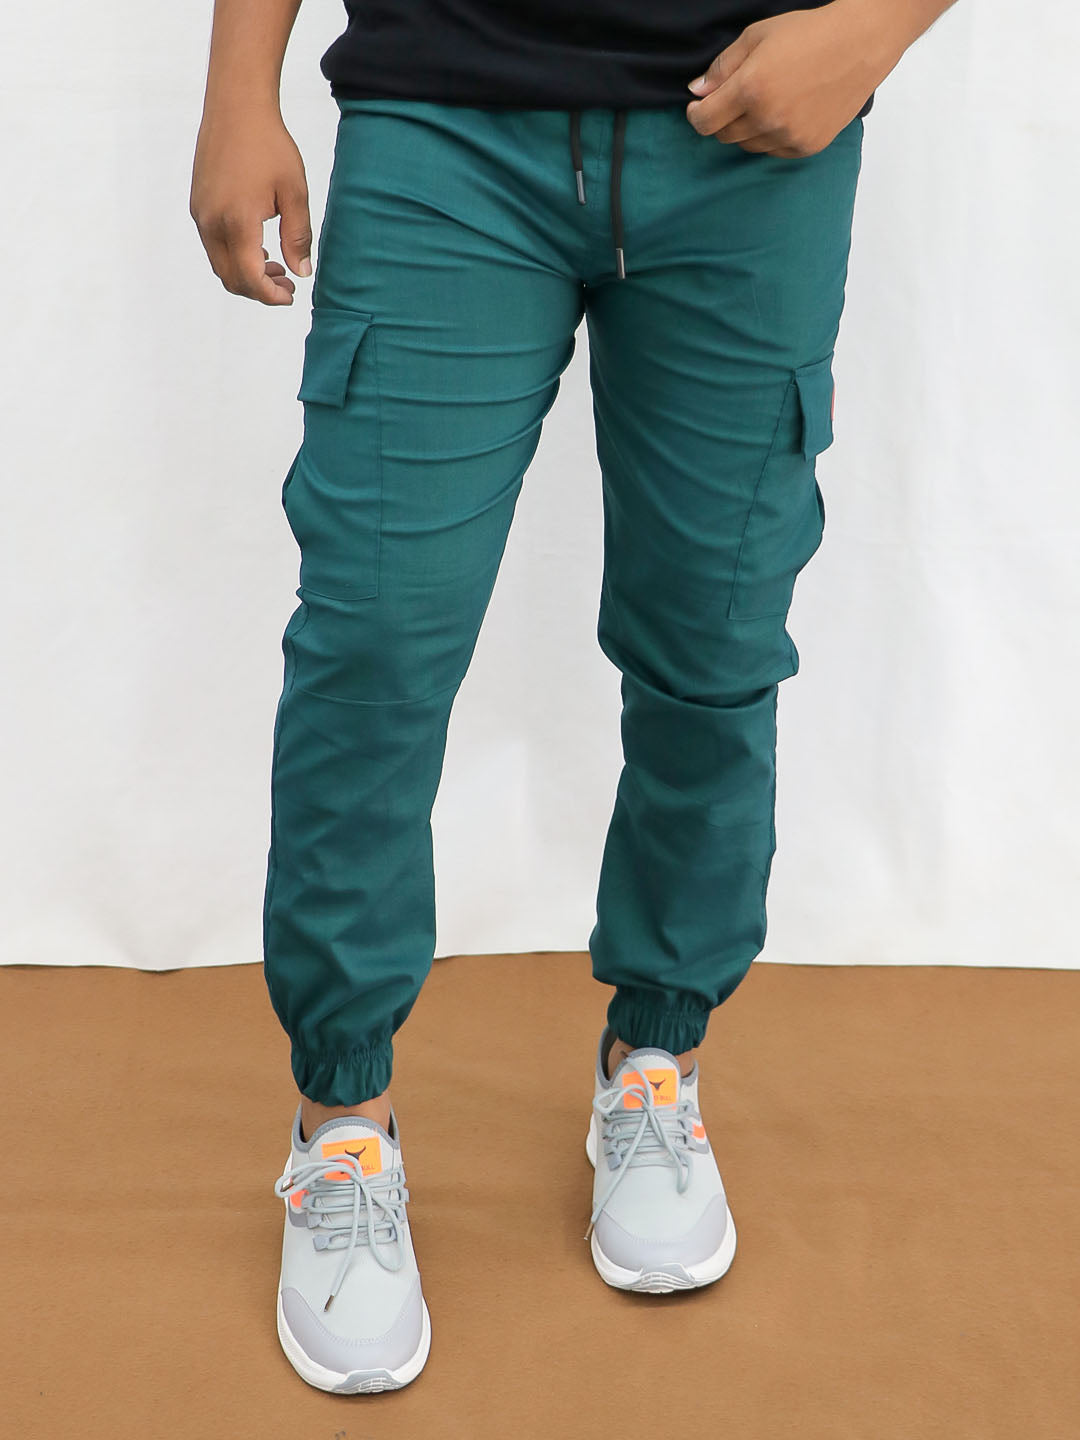 Product : six pocket joggers Colours : 4 Size : 28 to 36 Fabric : cotton Dm  for order 🛒 Home delivery available 📦 No cod ❌ Only… | Instagram